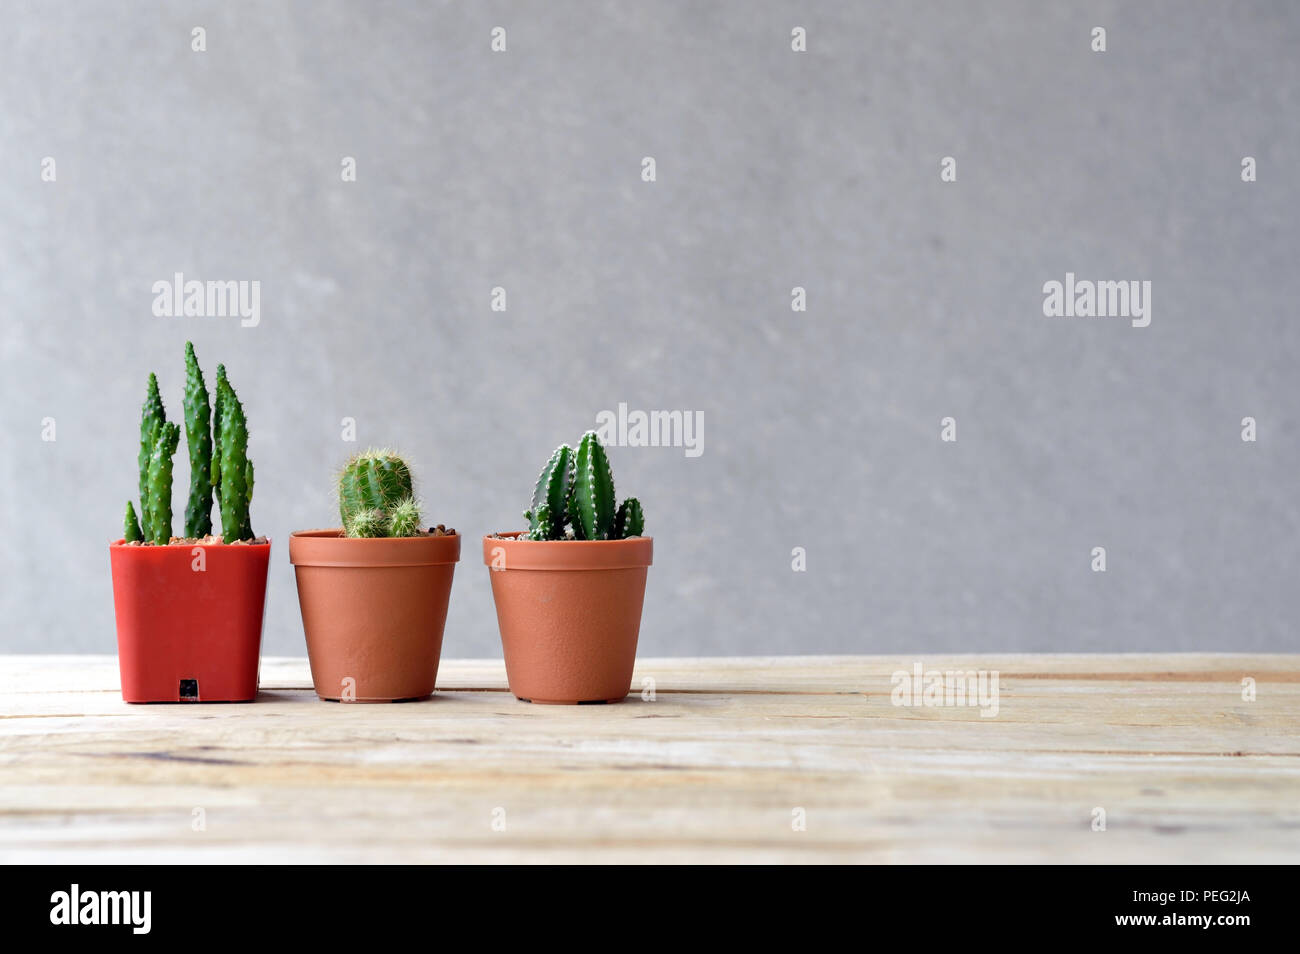 still life natural three cactus on wooden table Stock Photo